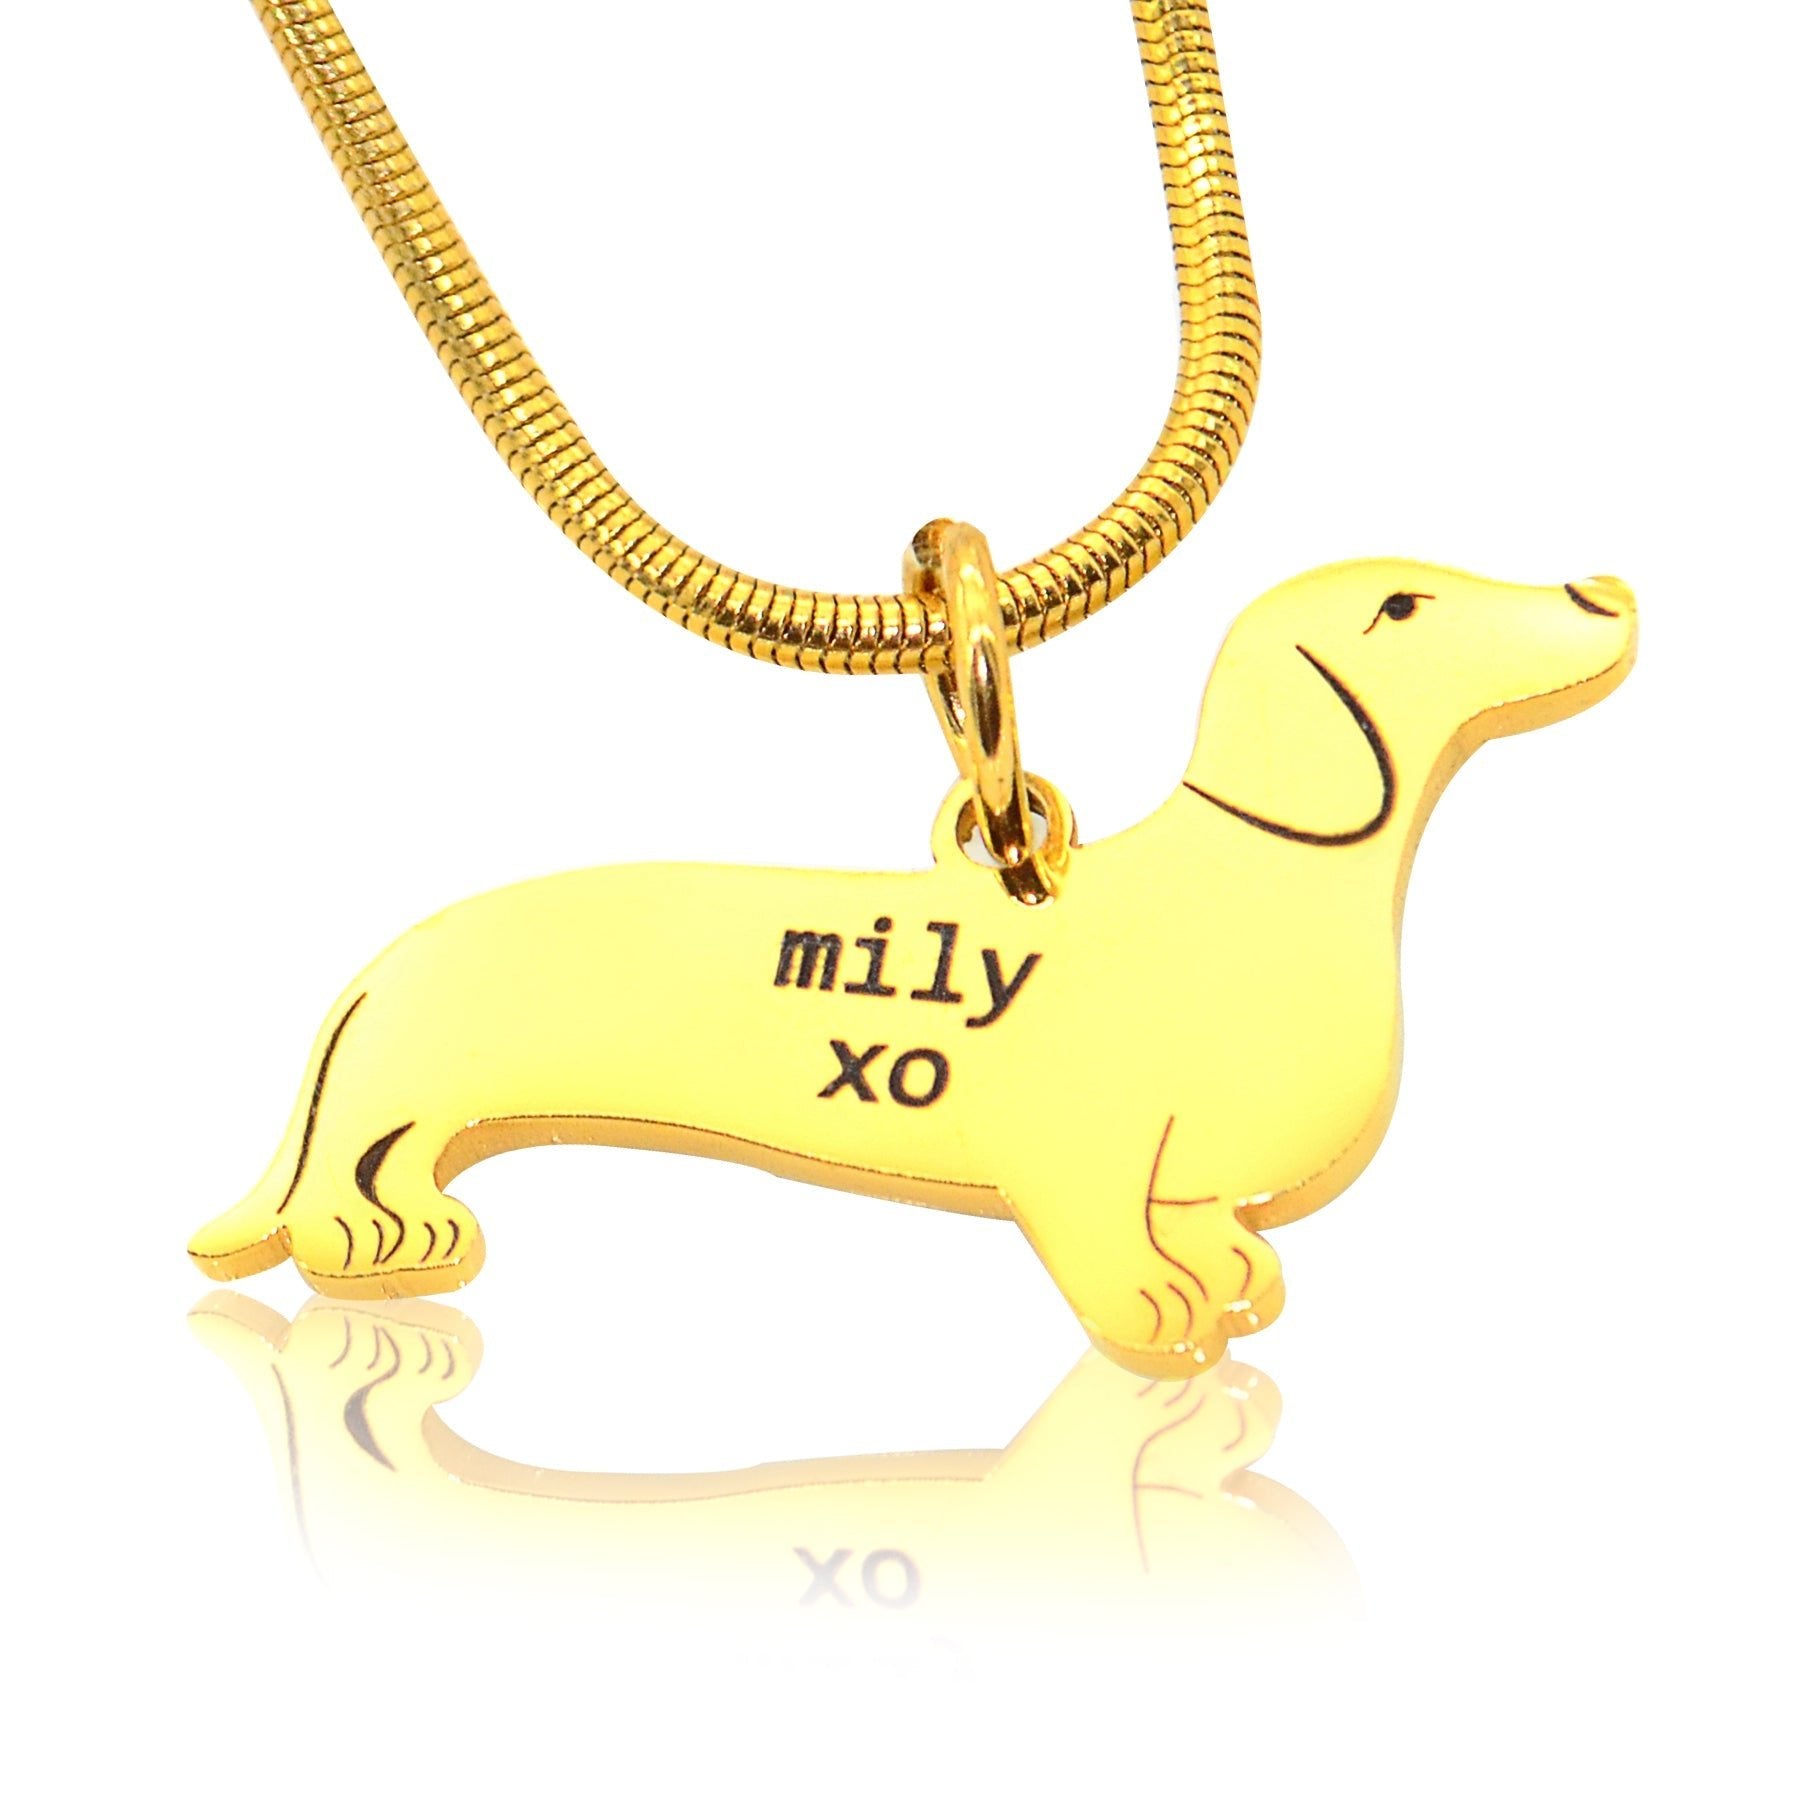 Dachshund Dog Necklace - Pet Jewellery by Belle Fever